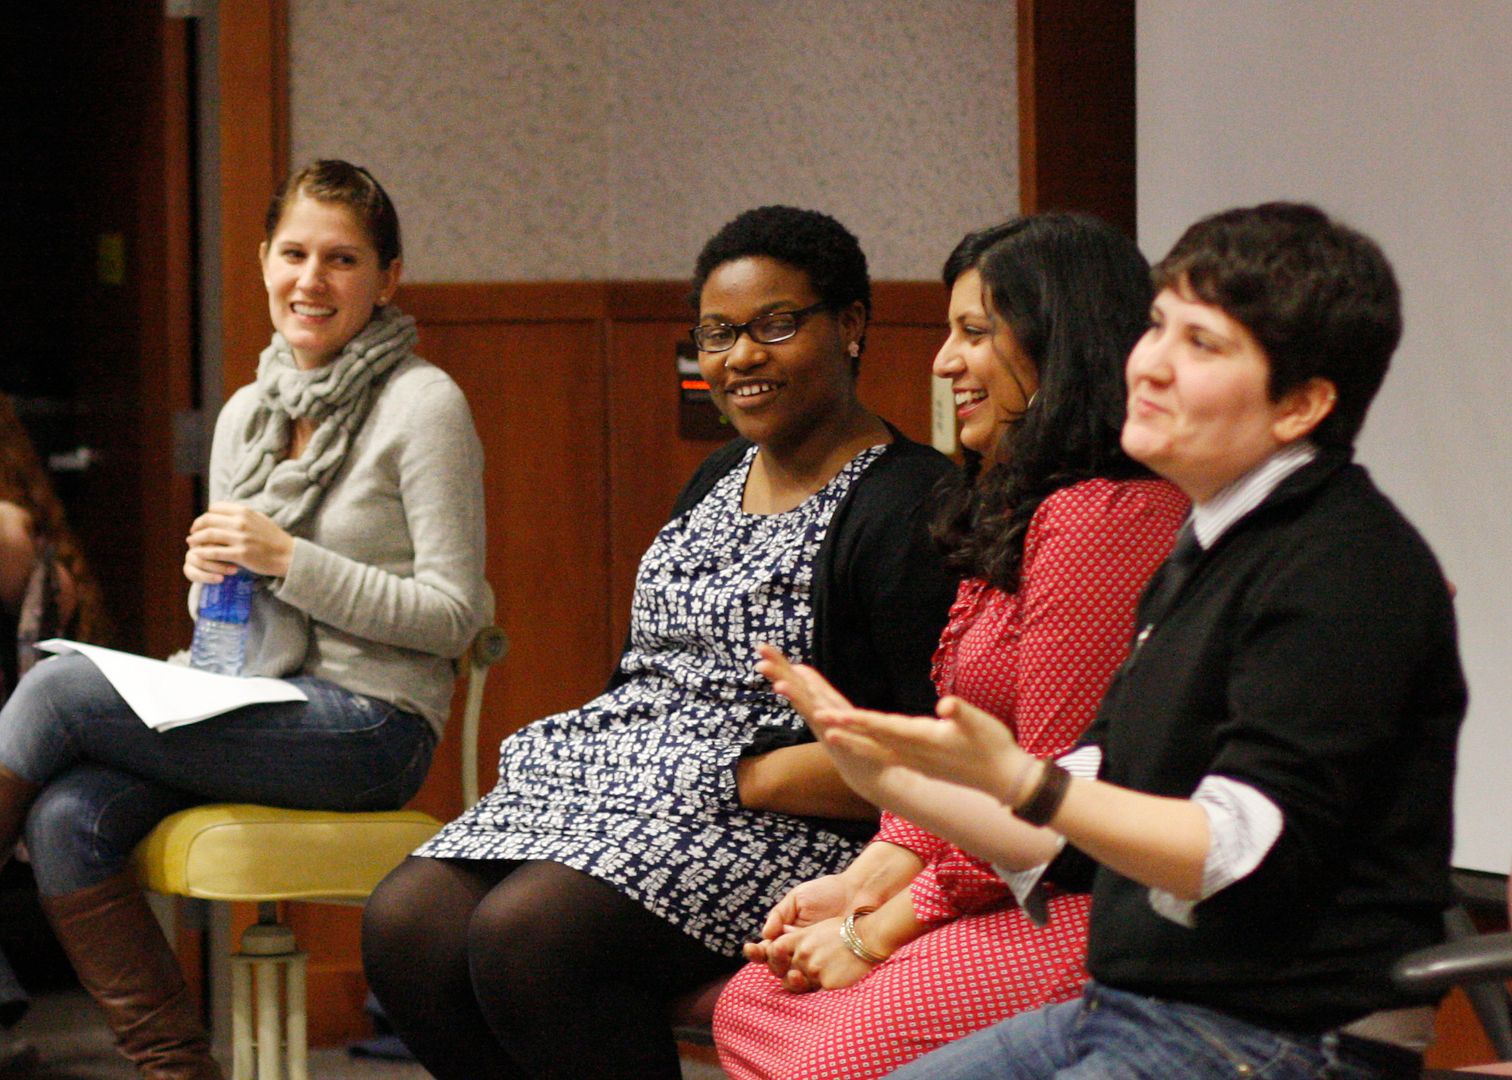 Editors Vanessa Valenti and Samhita Mukhopadhyay, a student panelist, and former Editor Miriam Perez at a speaking event